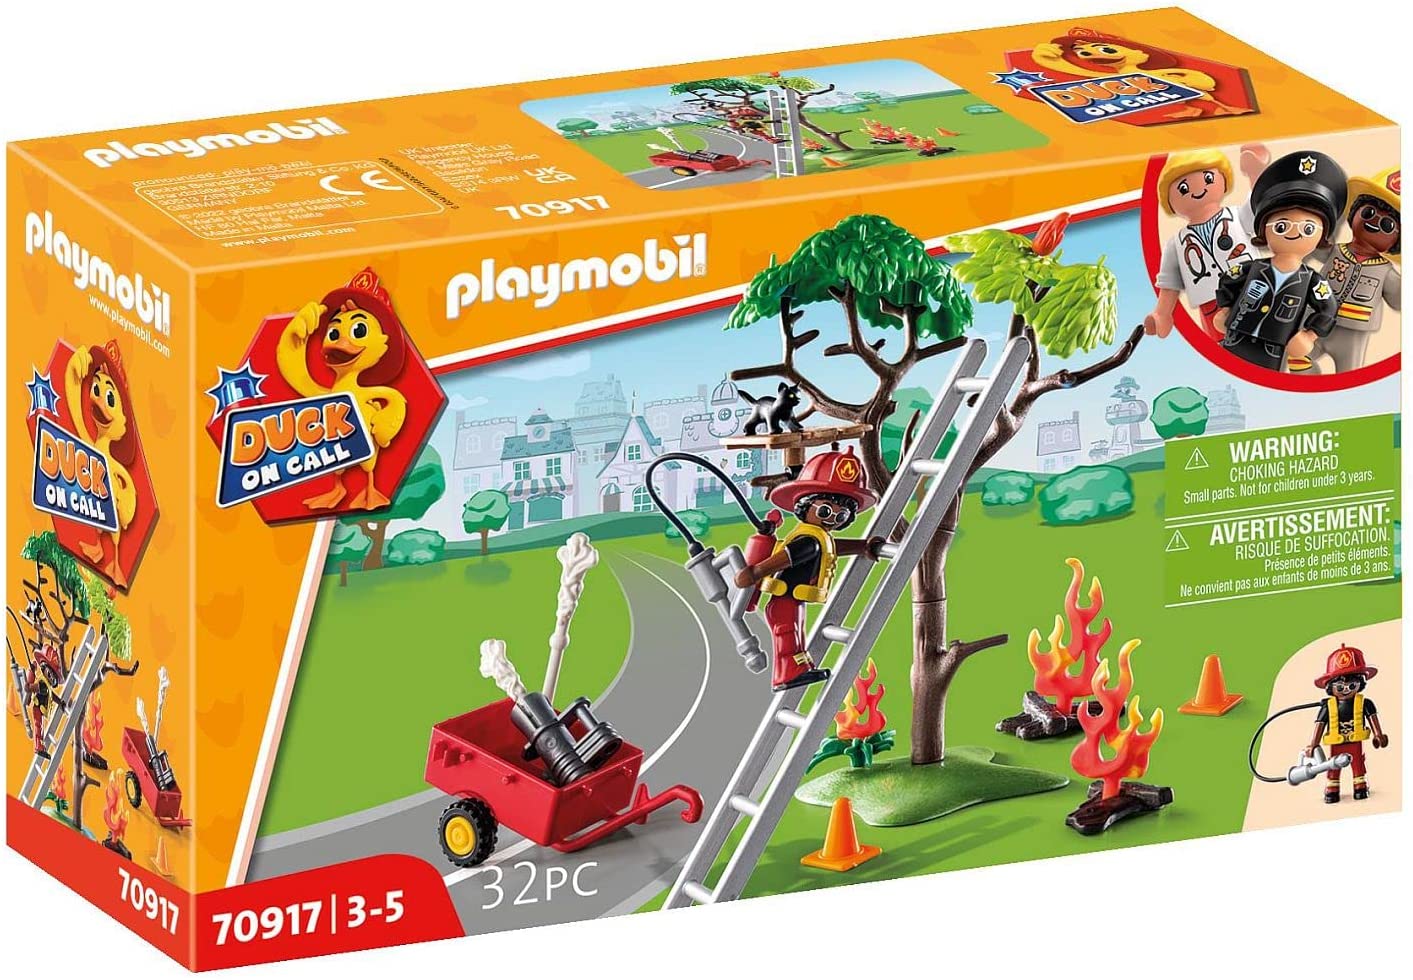 Playmobil Duck On Call - Fire Brigade Action Save the cat!